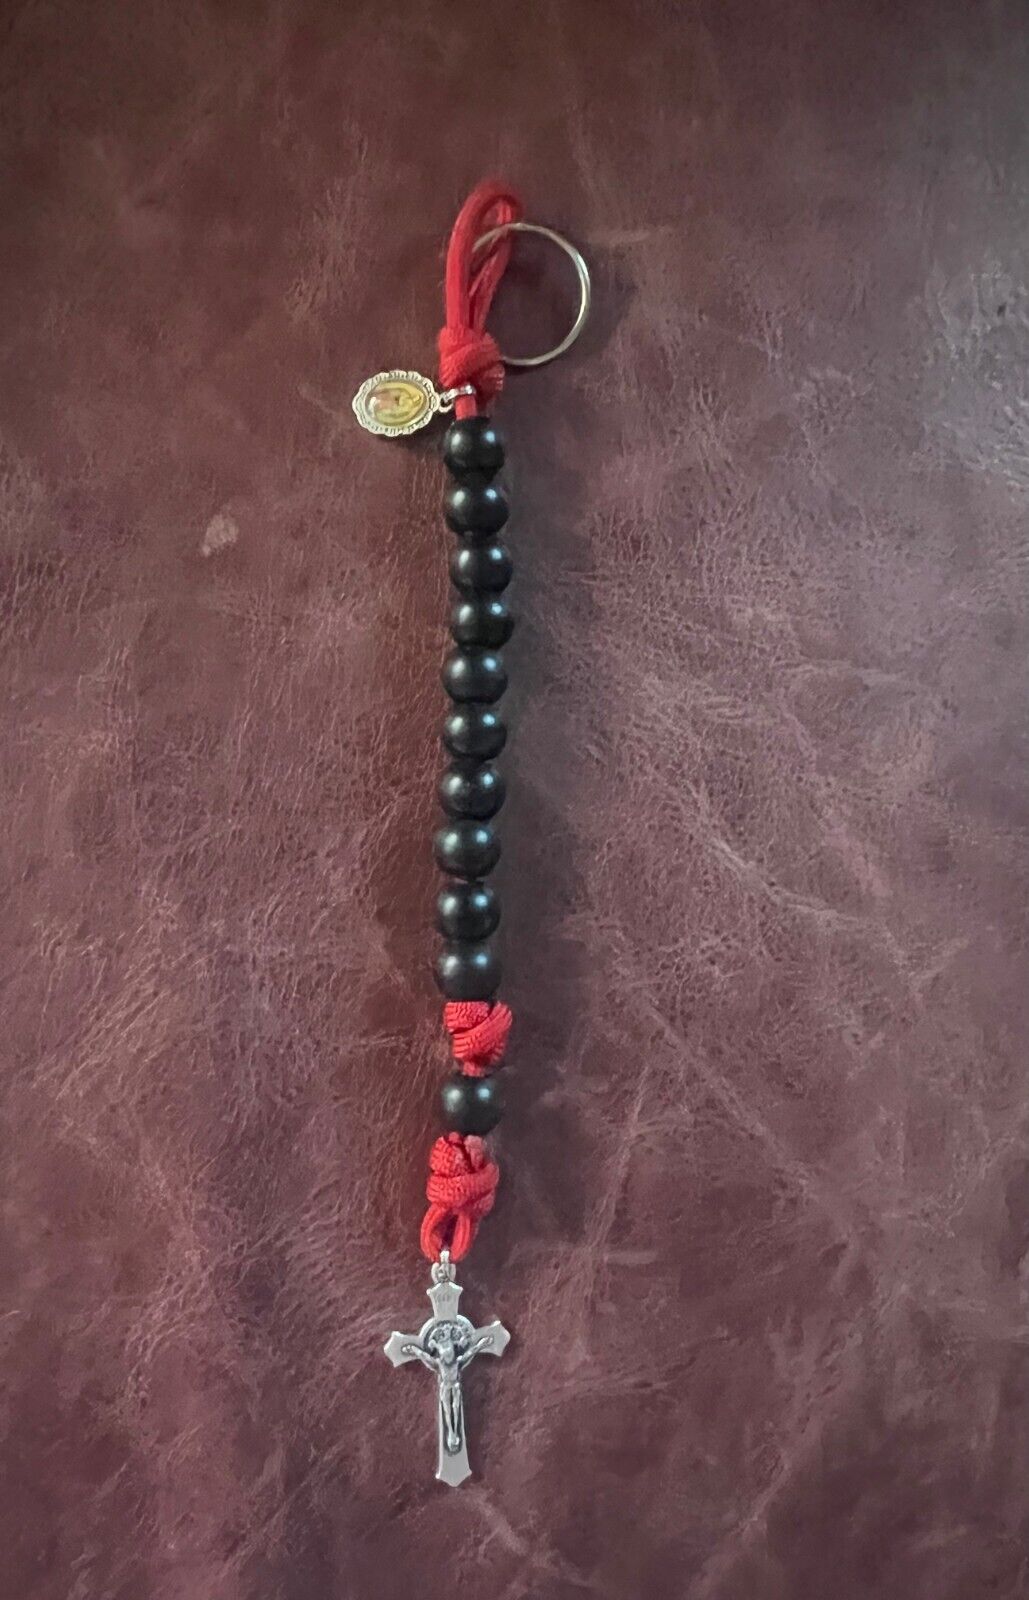 Pocket Rosary Black Beads with Red Paracord Single Decade